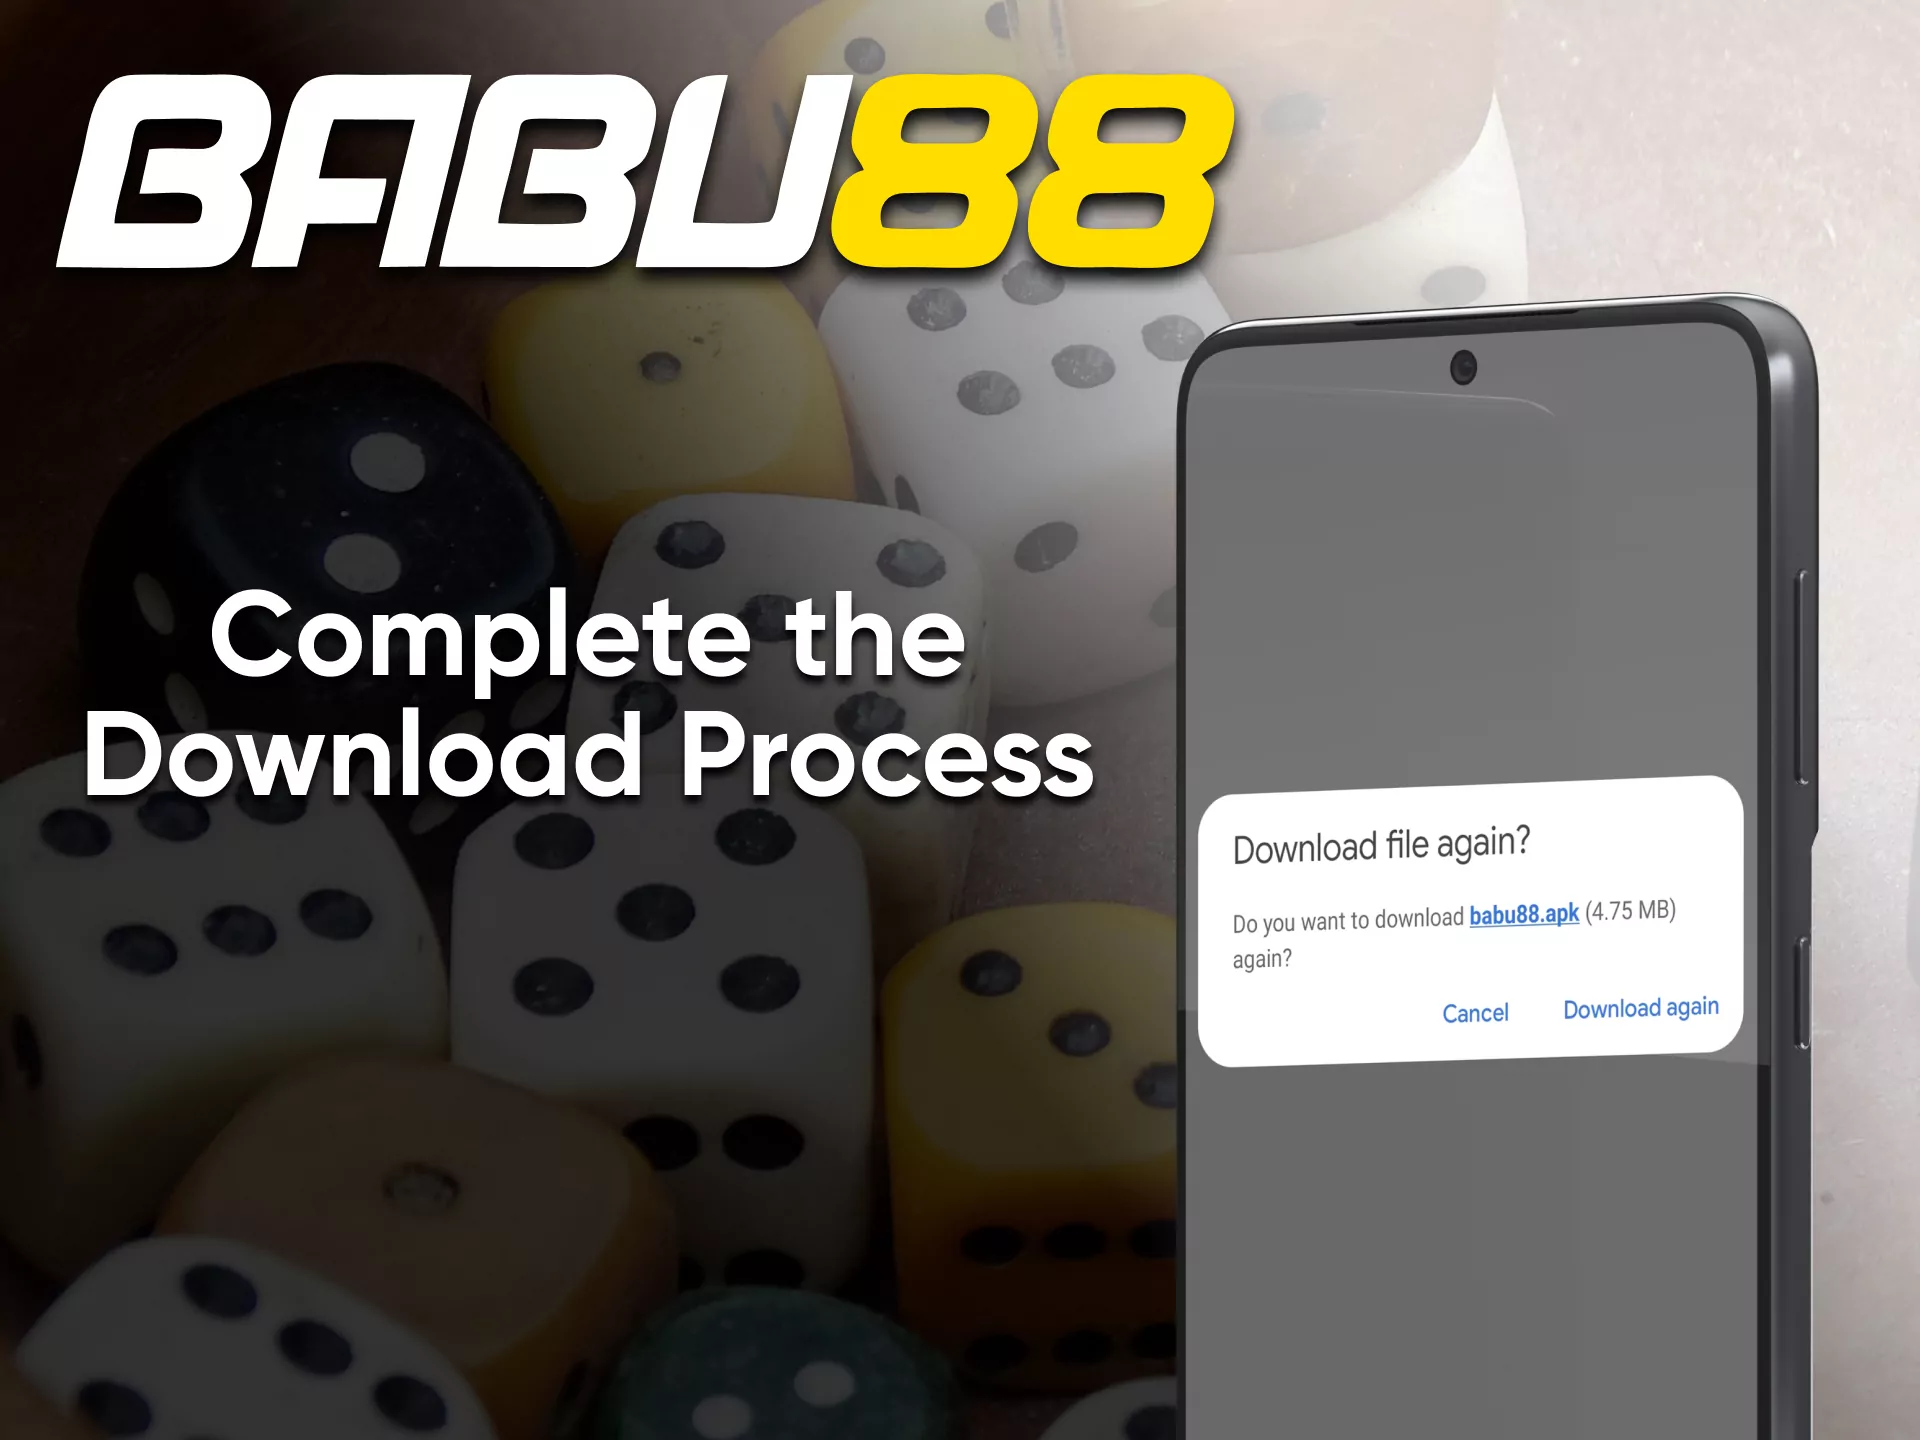 Download the Babu88 app to play at the casino.